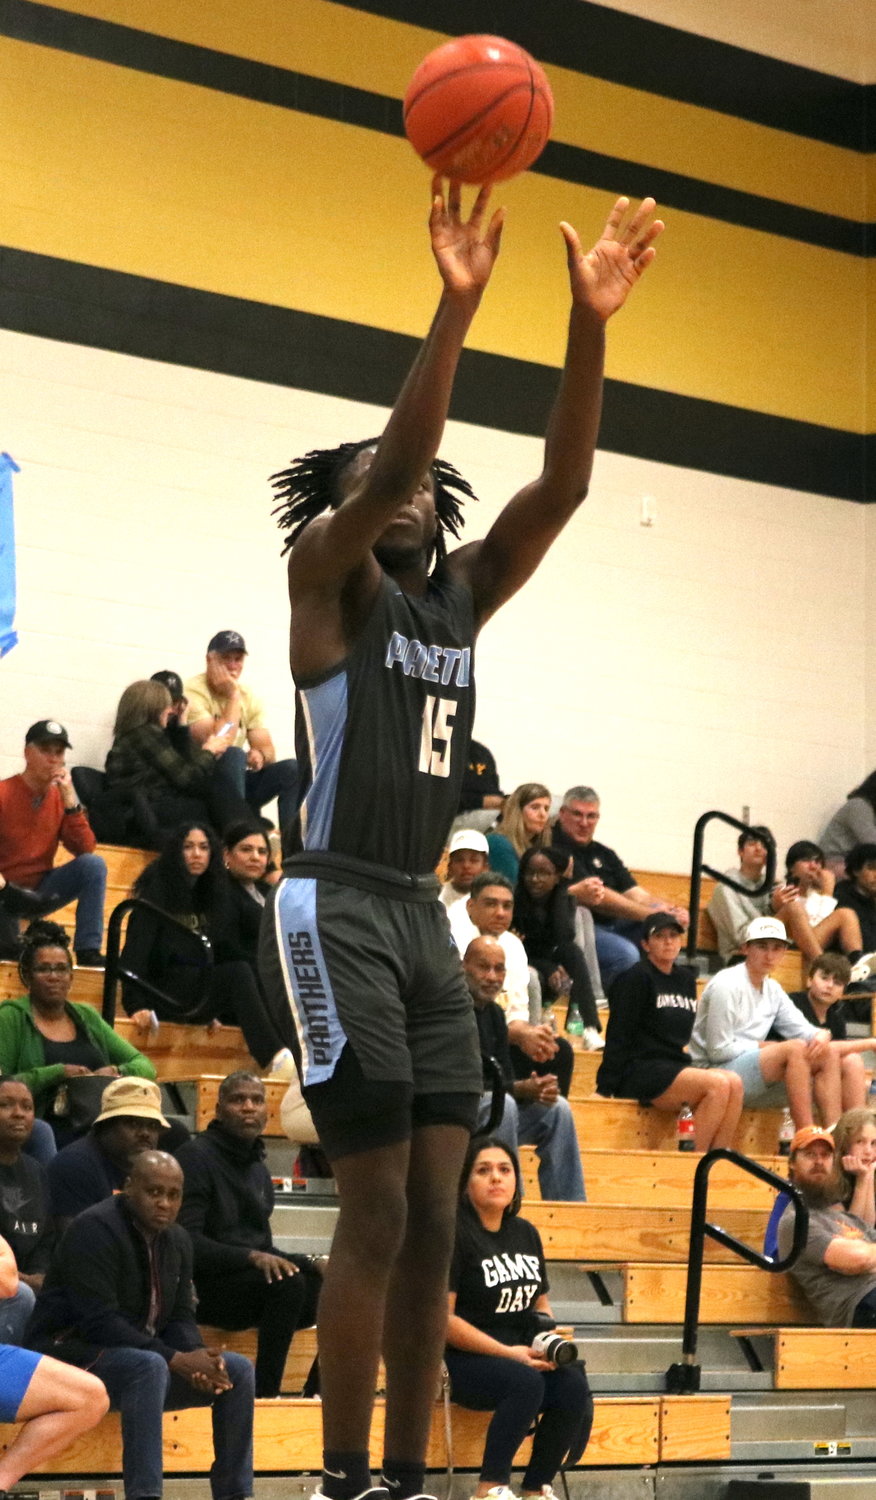 Ade Onaleye shoots a 3-pointer during Wednesday's game between Paetow and Jordan at the Jordan gym.